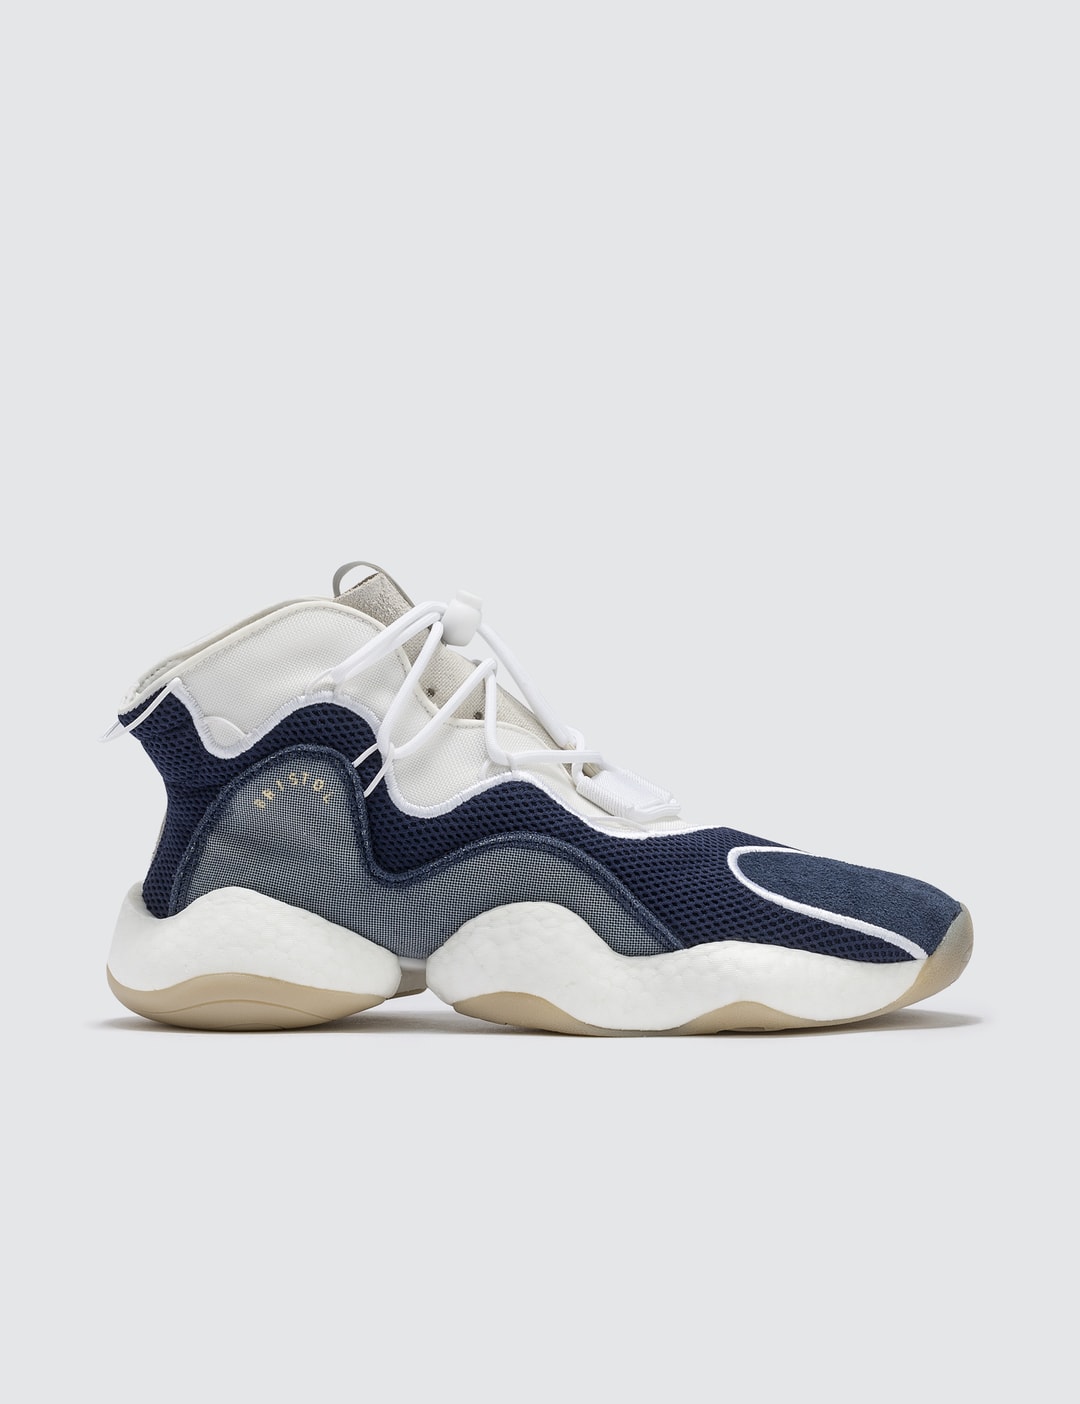 Ontmoedigd zijn Bulk contant geld Adidas Originals - Bristol Studio x Adidas Crazy BYW LVL I | HBX - Globally  Curated Fashion and Lifestyle by Hypebeast